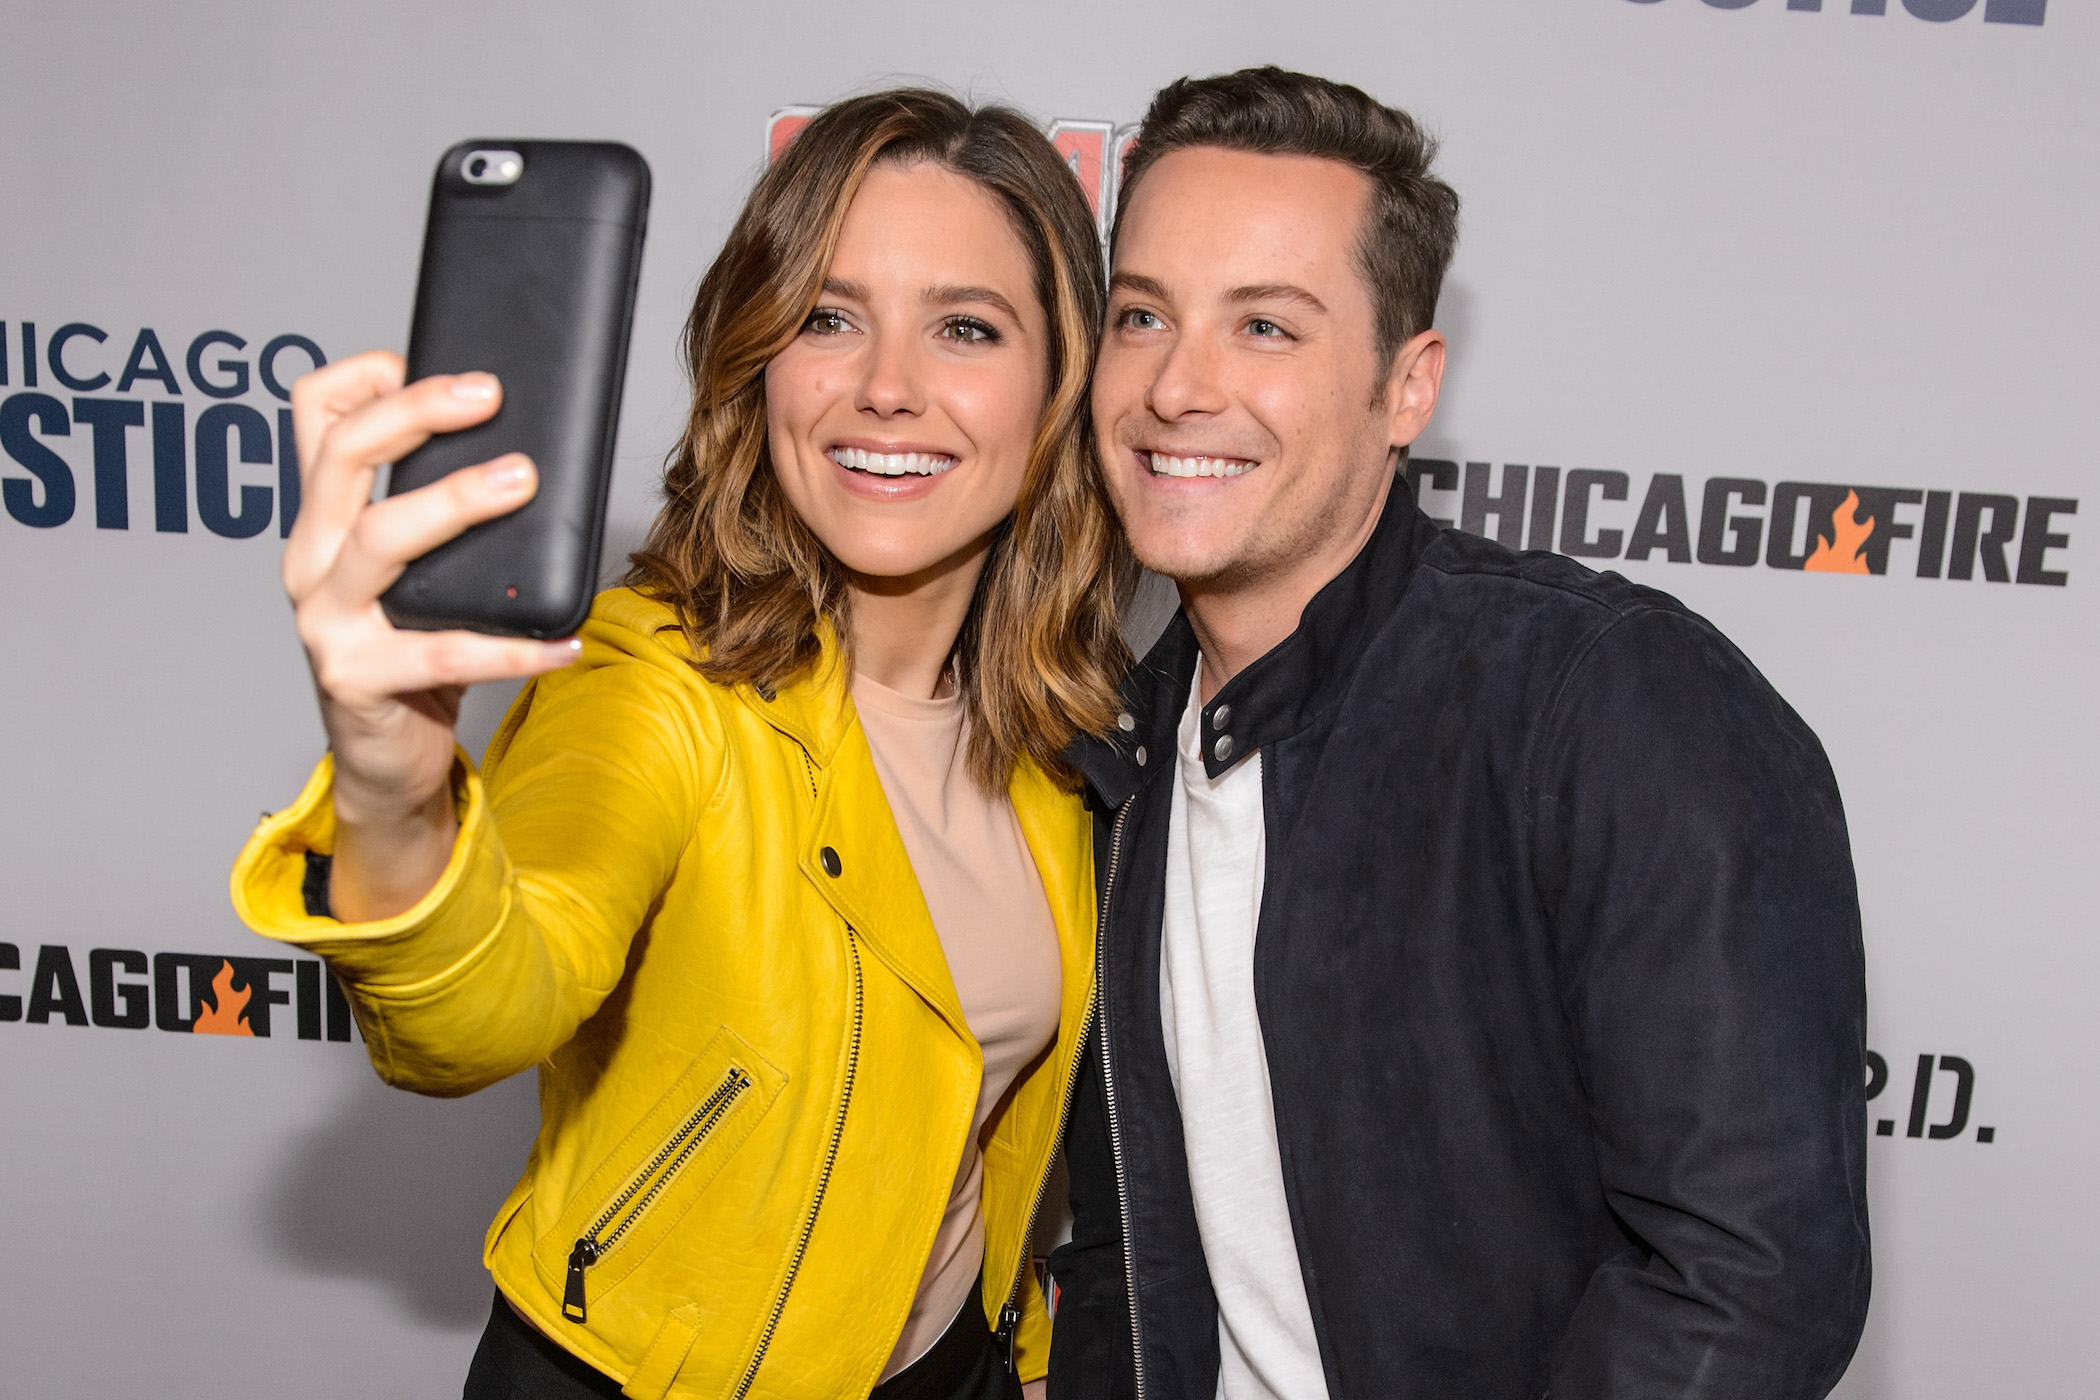 Sophia Bush and Jesse Lee Soffer smiling and taking a selfie at a 'Chicago P.D.' event